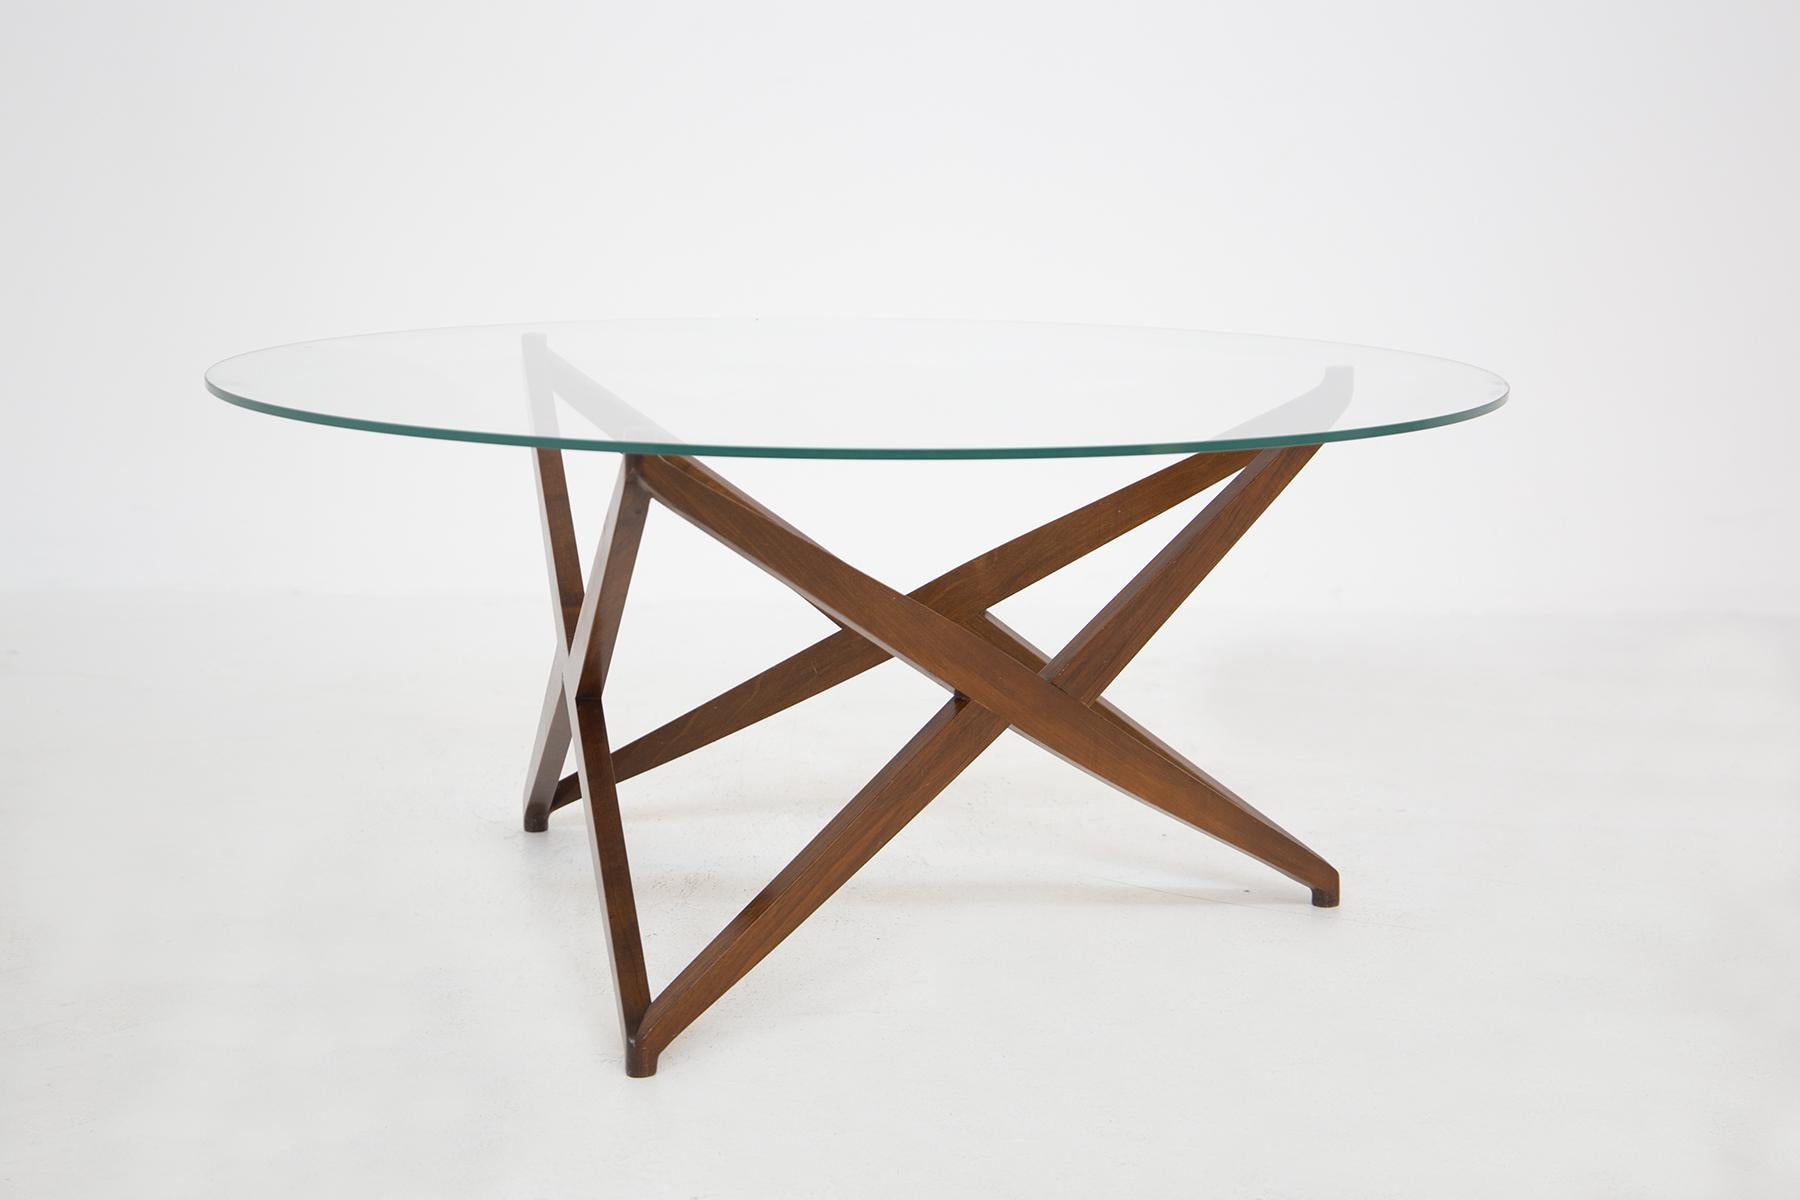 Splendid coffee table in wood and glass designed by Angelo Ostuni in the 60s, of fine Italian manufacture.
The coffee table is particular because its legs create a wonderful star, visible from the glass.
The table top is round and is in a splendid